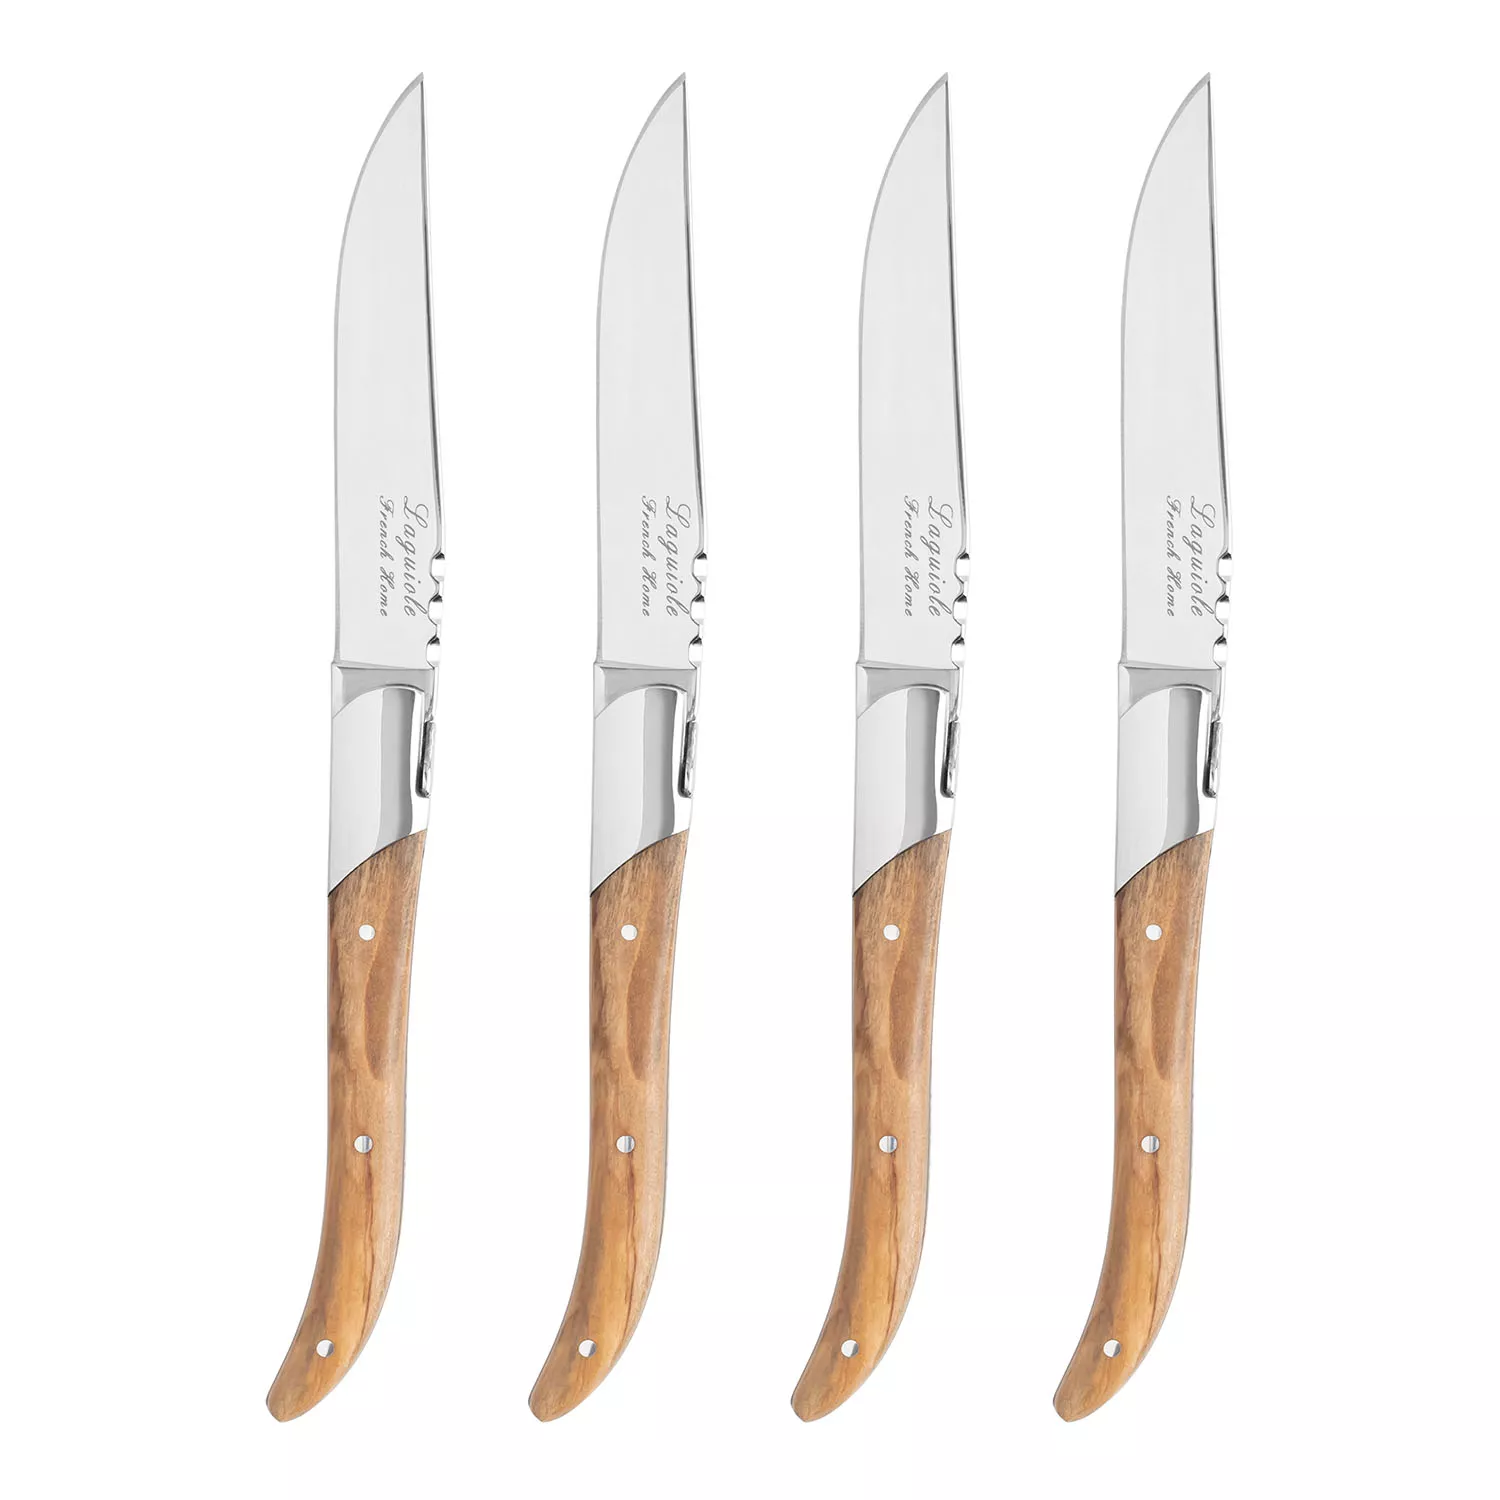 French Home Laguiole Connoisseur Steak Knives with Olivewood Handles, Set of 4 